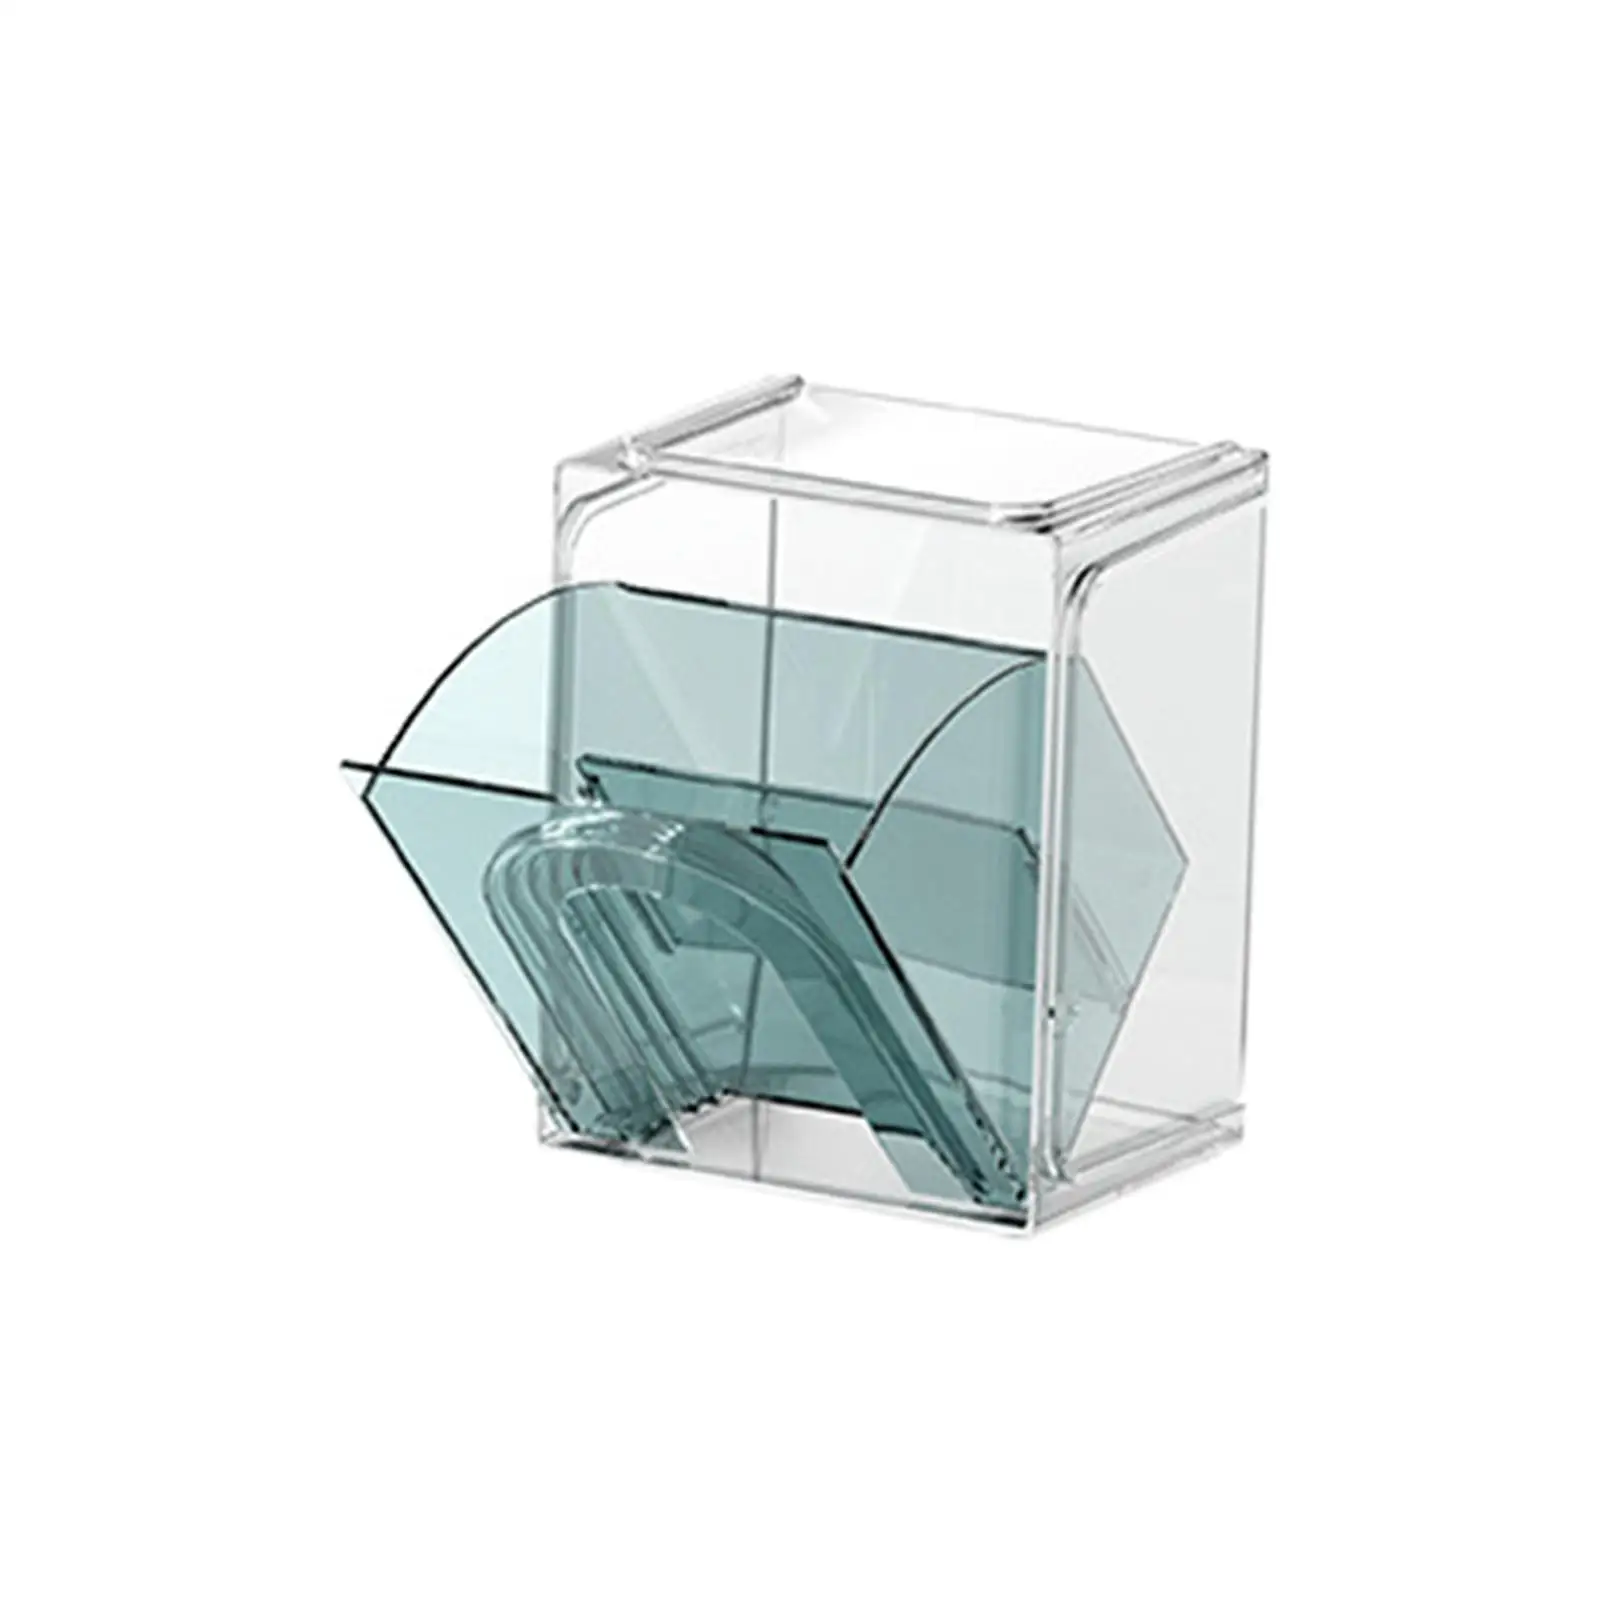 Tea Storage Box Storage Organizer Box Multiuse Transparent Coffee Capsules Holder for Closets Pantry Dining Cabinets Office